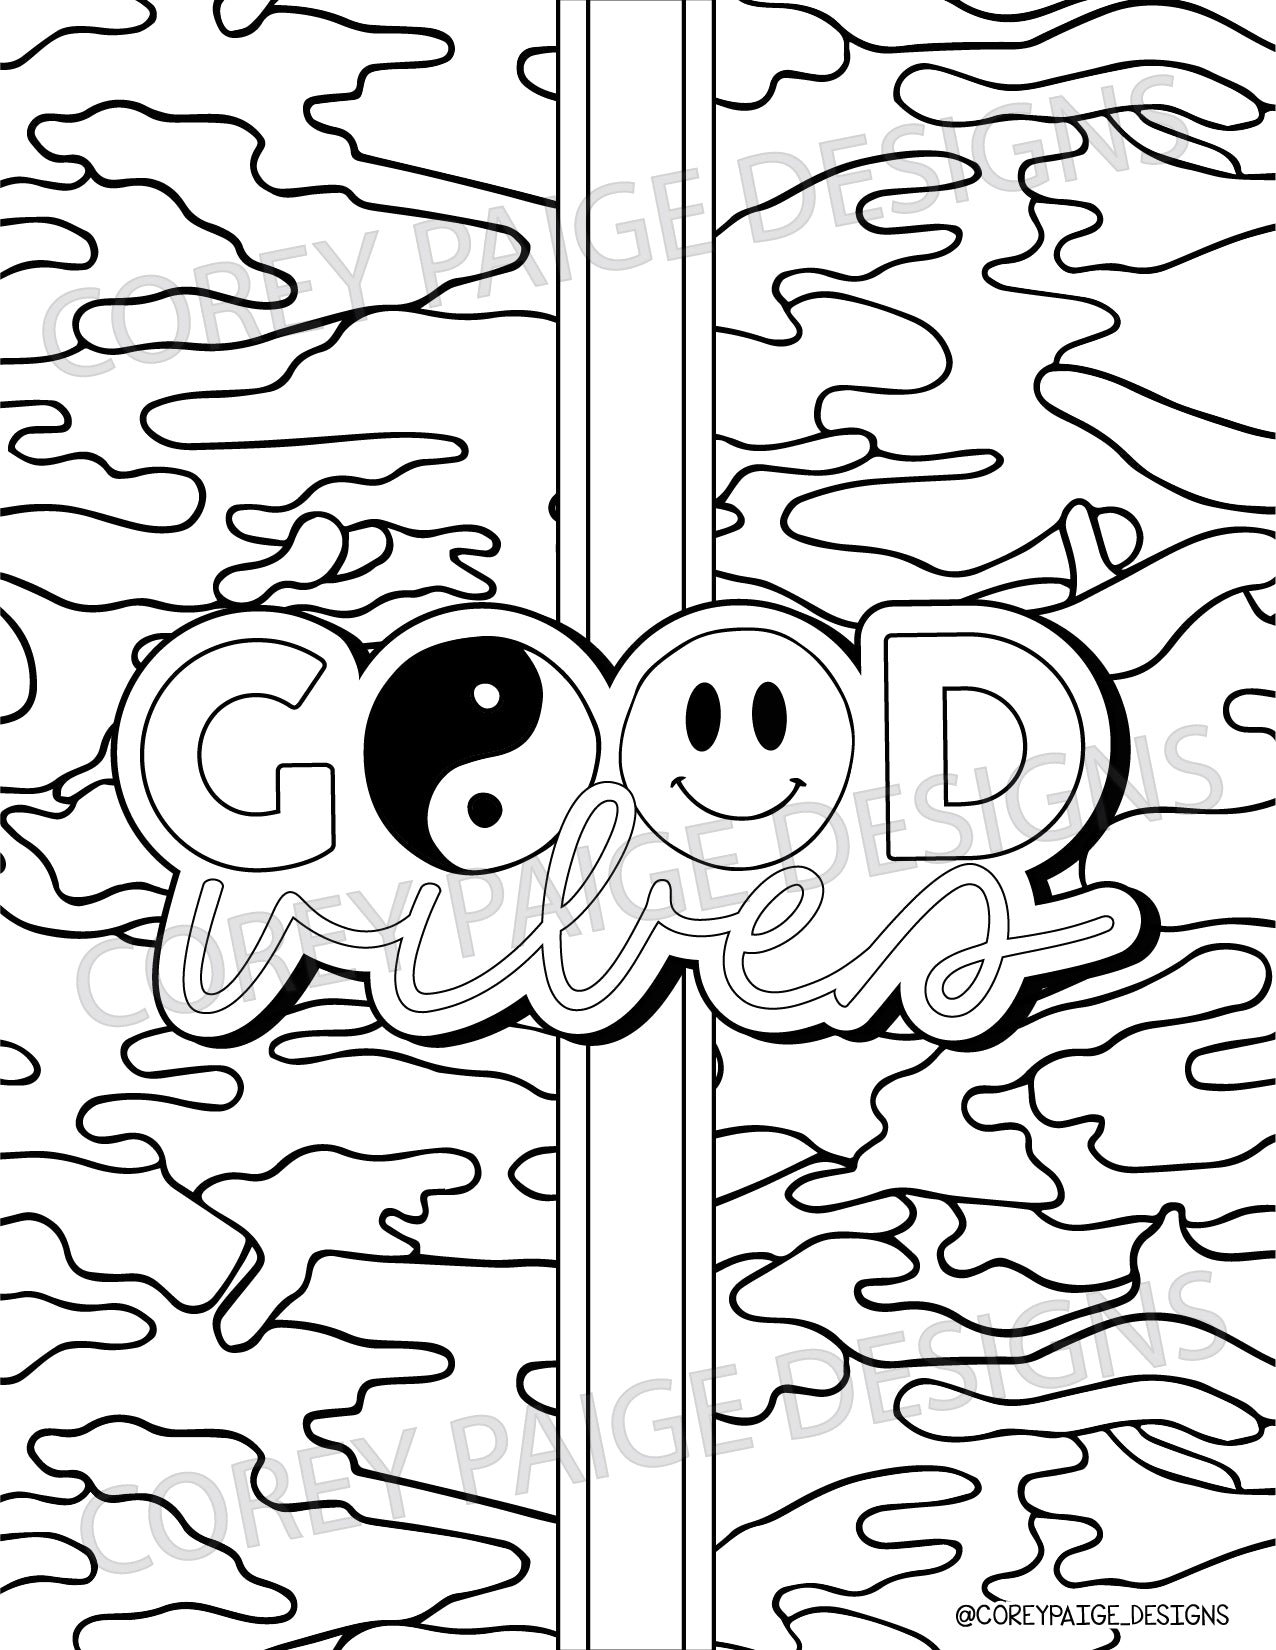 √ Camo Coloring Pages / Free Online Coloring Pages American Hero